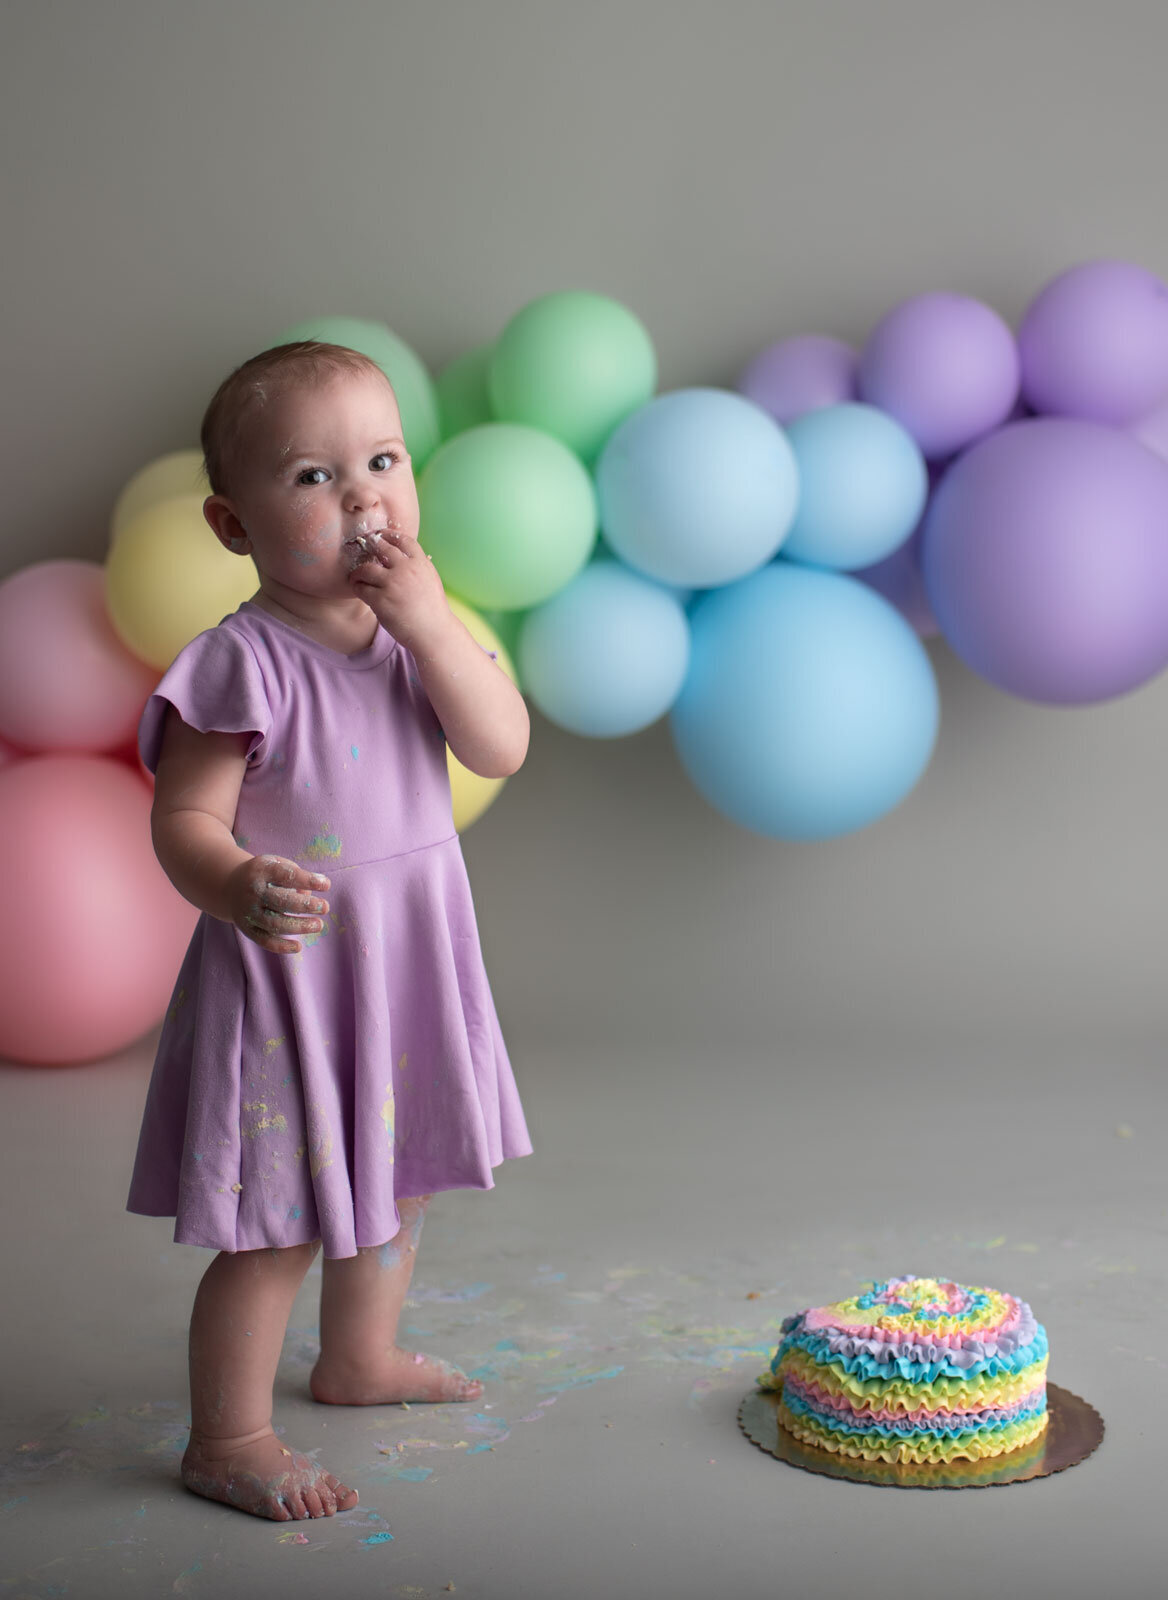 baby standing and eating cake